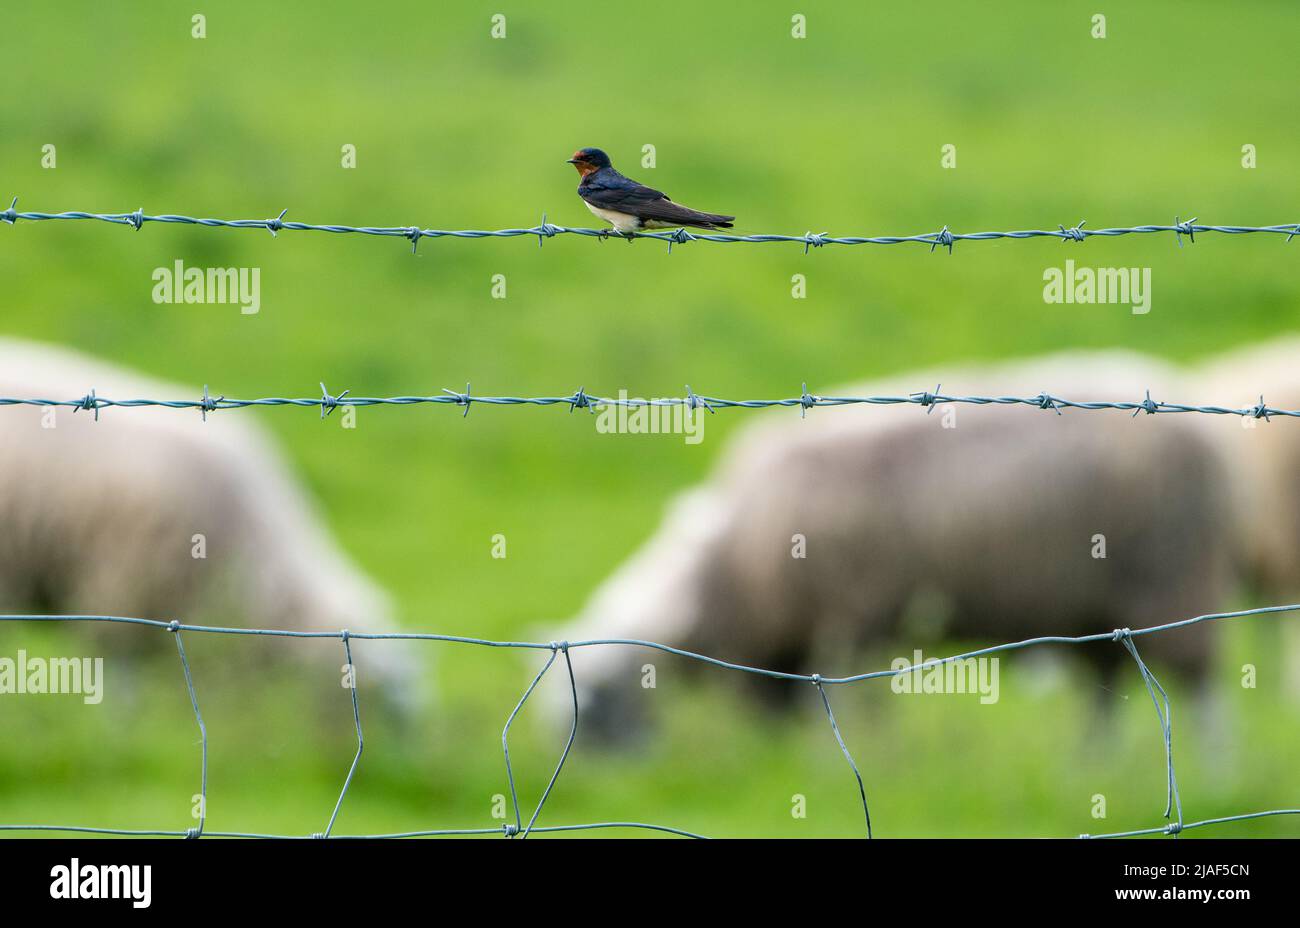 A swallow on a barbed wire fence on farmland, Newcastle, Northumberland, UK. Stock Photo